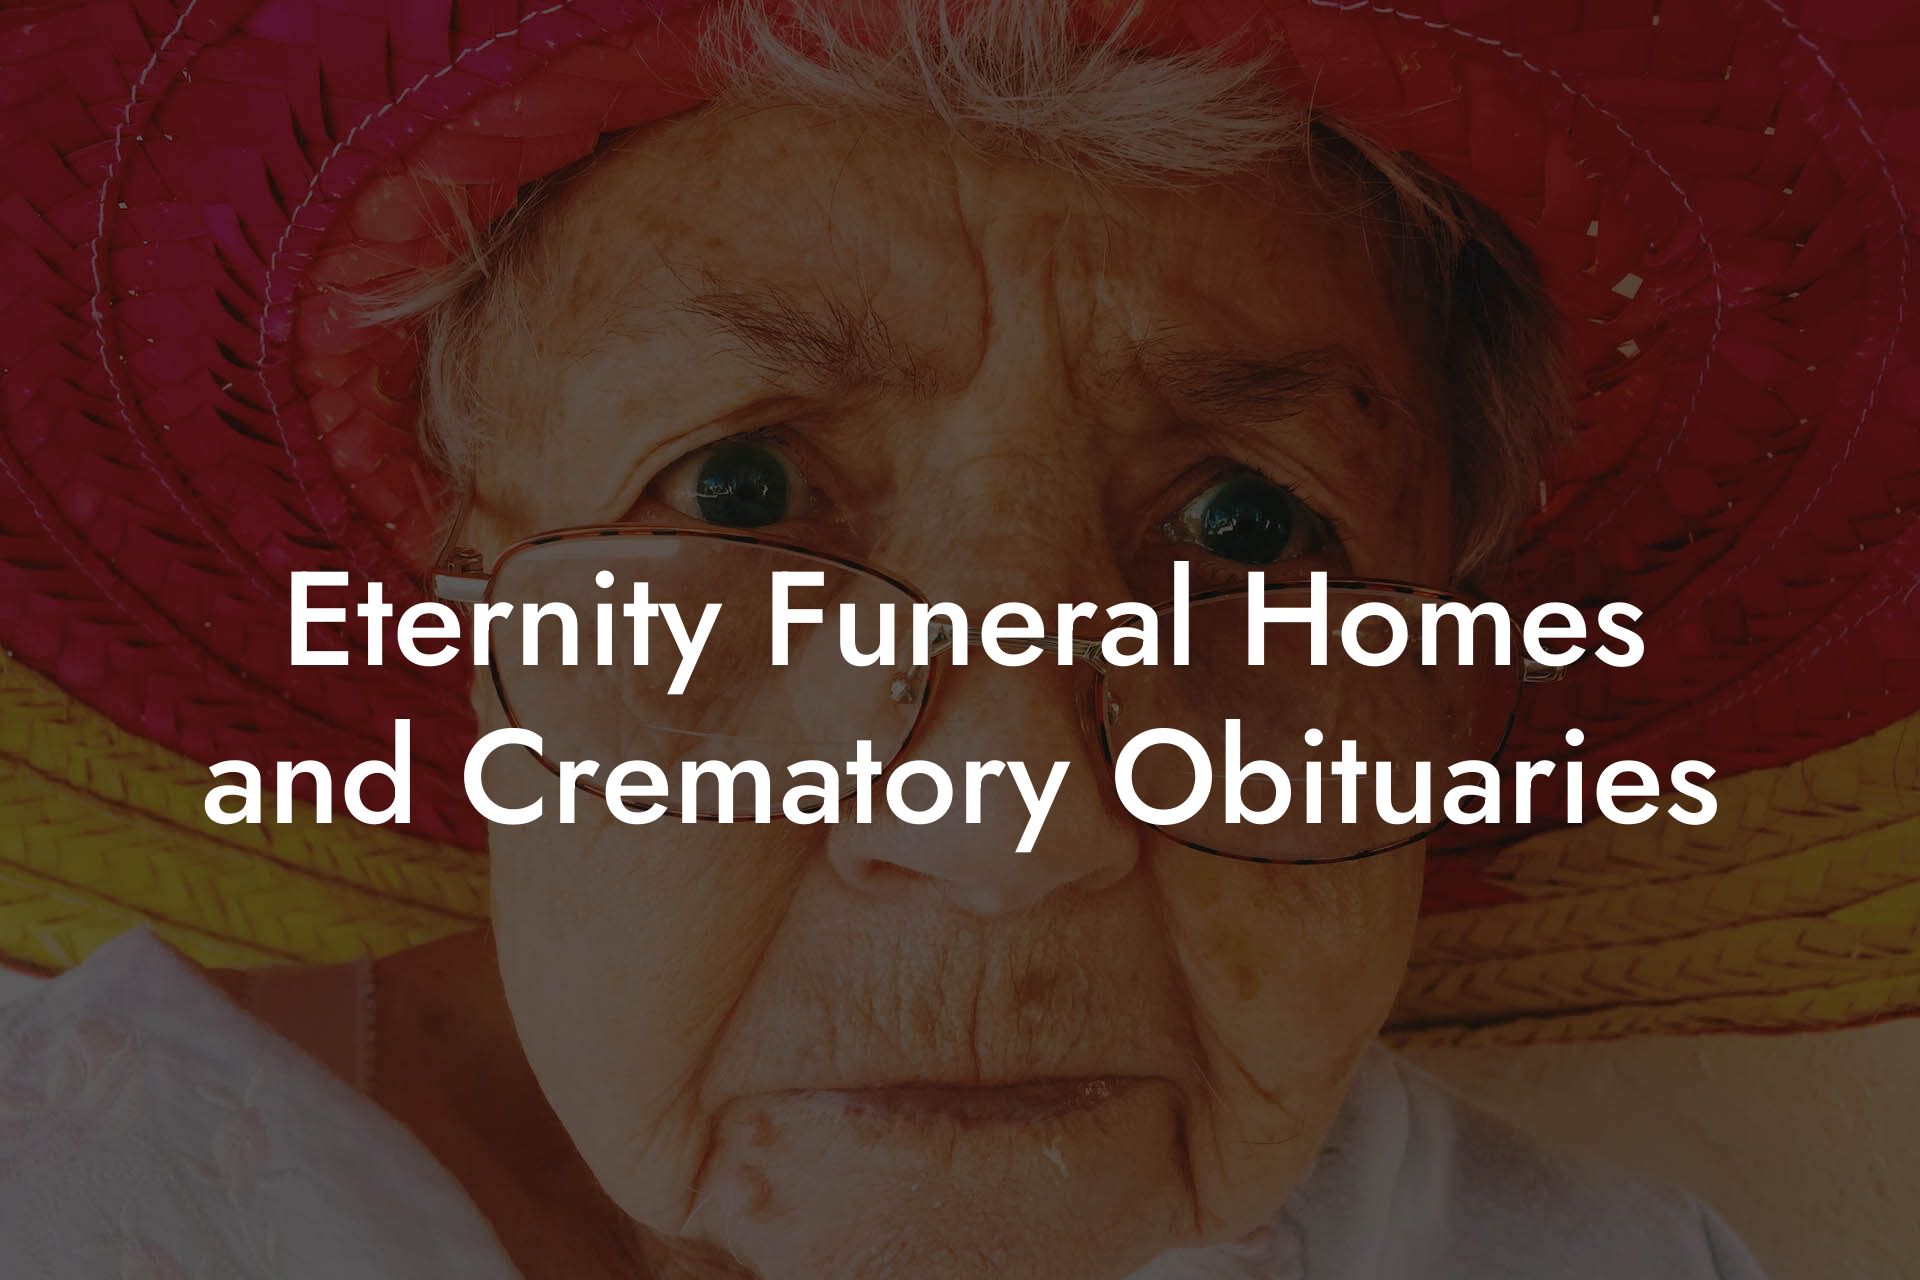 Eternity Funeral Homes and Crematory Obituaries